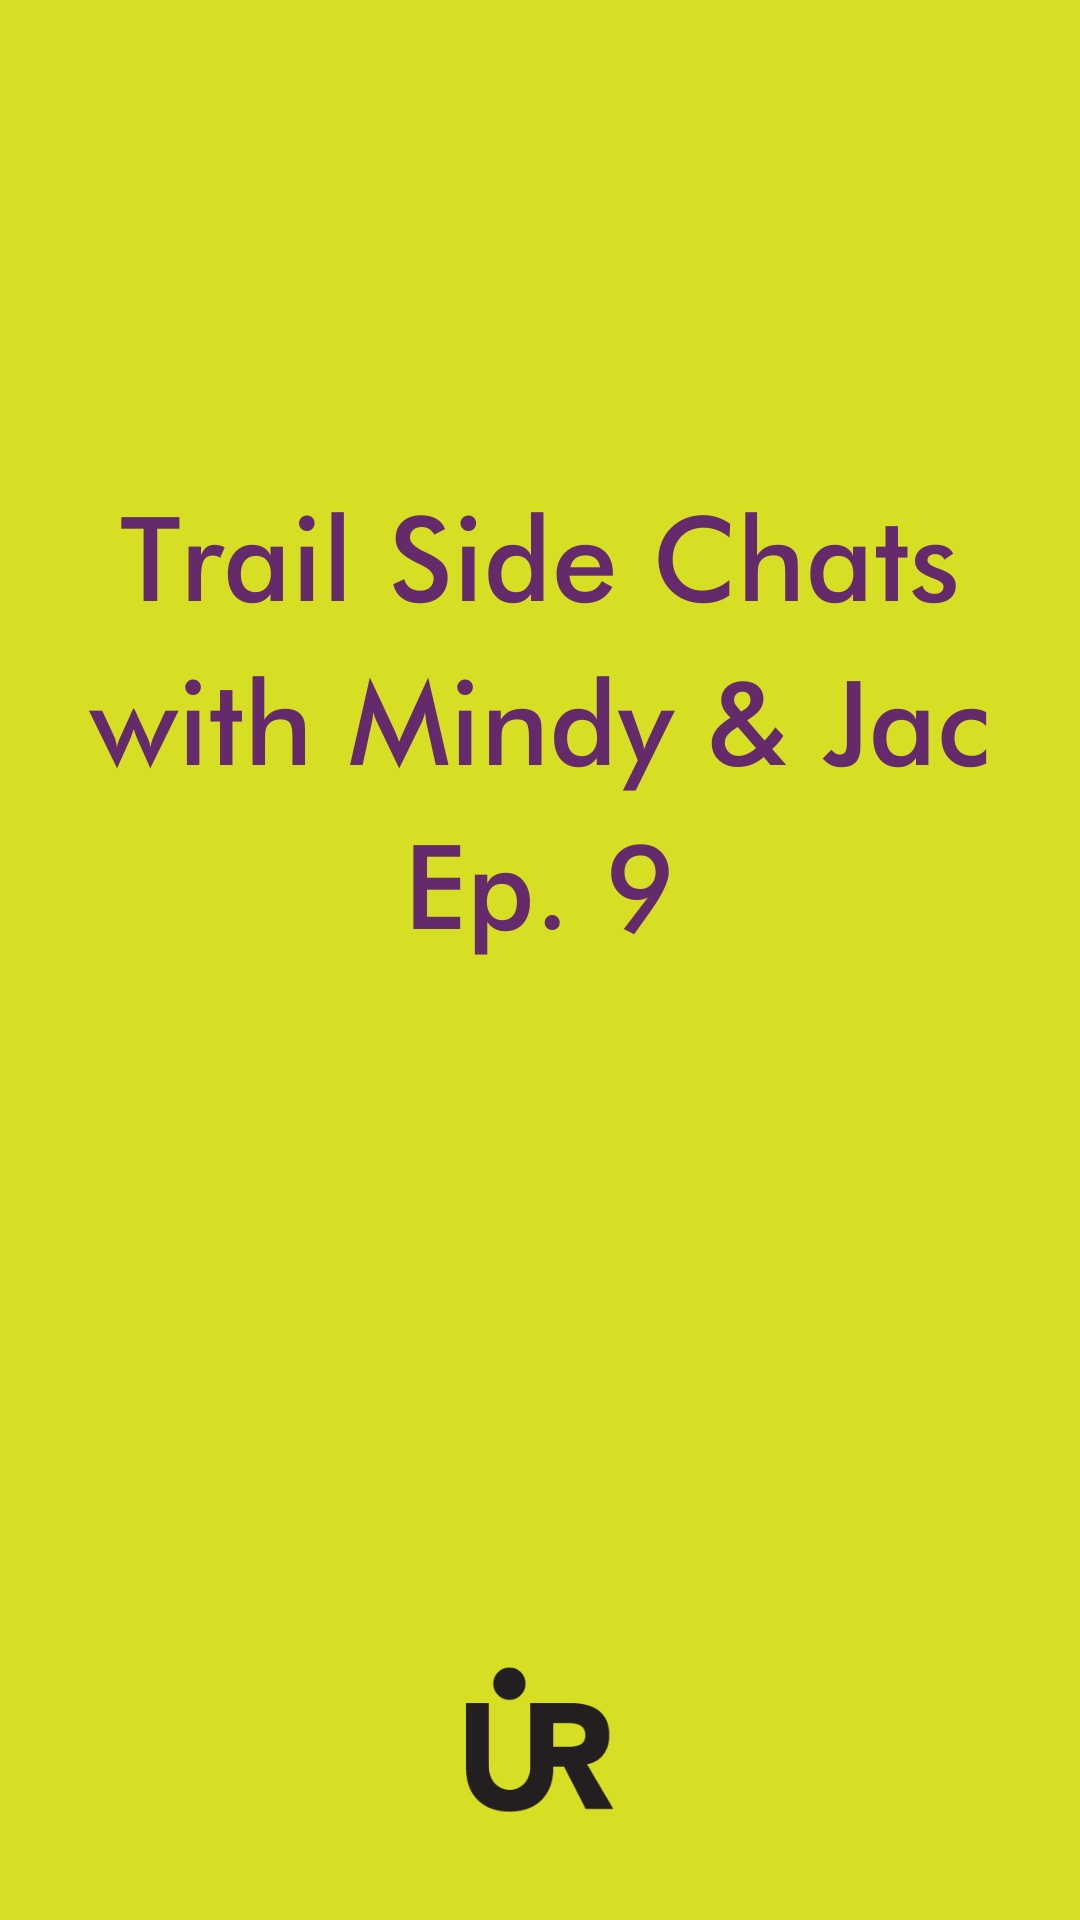 TRAIL SIDE CHATS WITH MINDY & JAC- EP. 9 - UR Sportswear